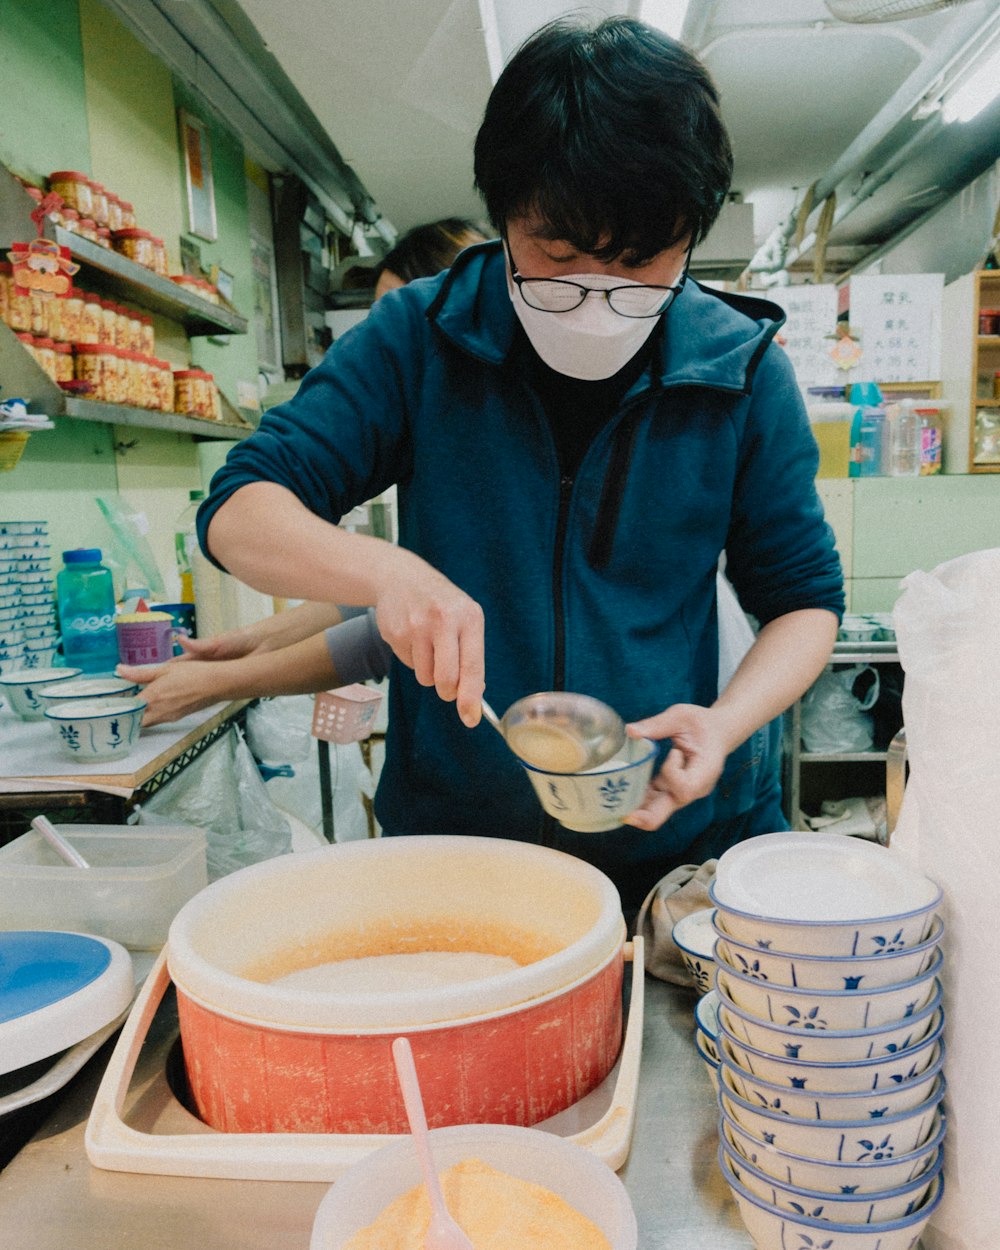 a man in a mask is mixing something in a bowl